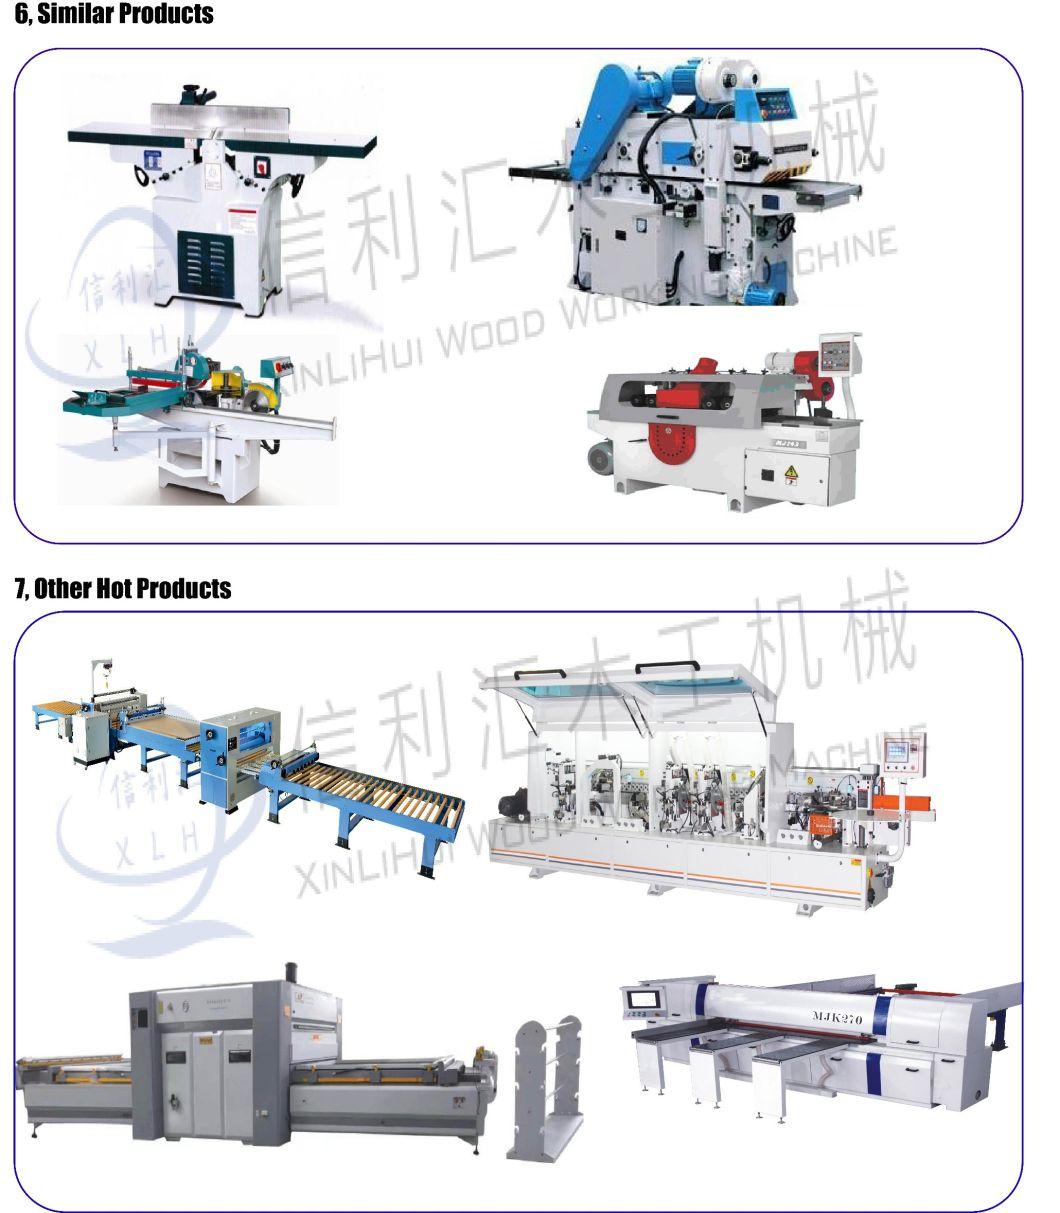 Woodworking Steel Jointer Woodworking Table Planer/ Heavy-Duty Woodworking Machine Surface Planer for Hard Wood/ Wood Planer/Moulder Machine